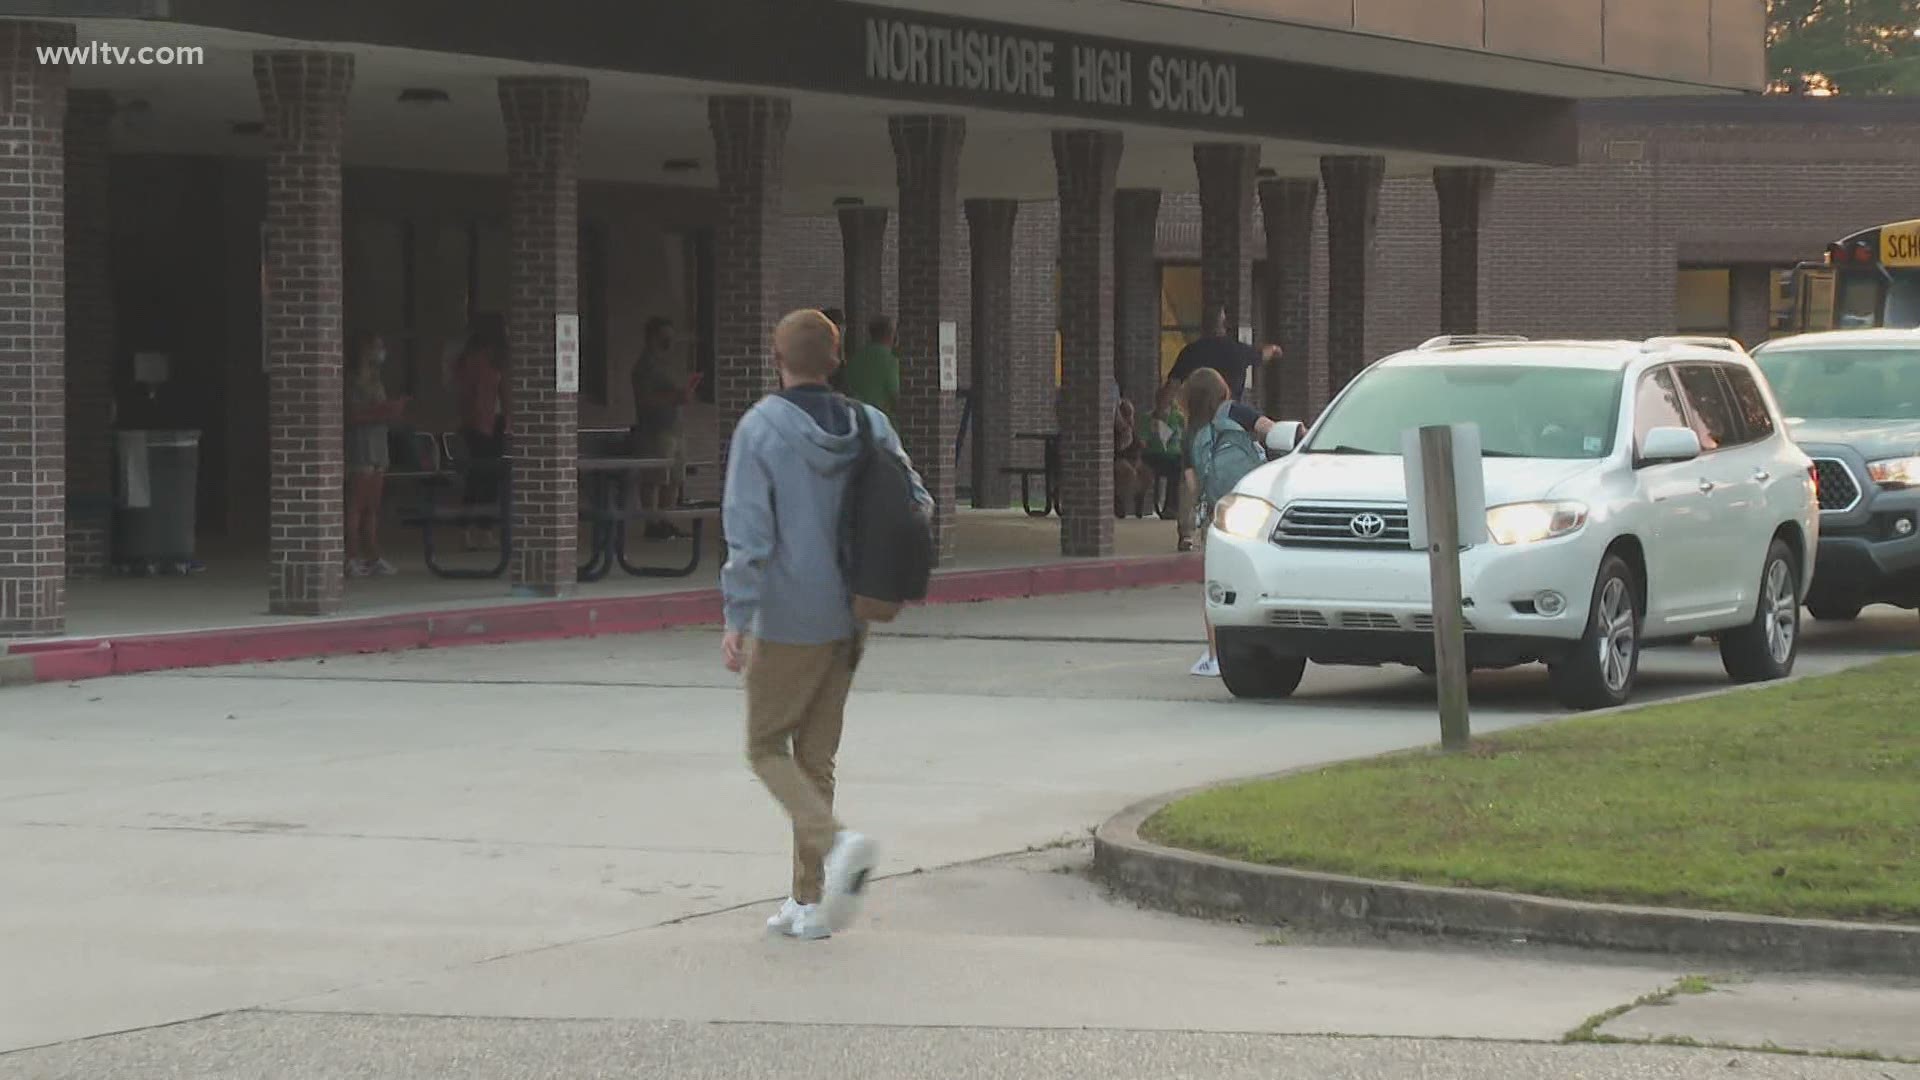 In Saint Tammany Parish, students are coming back to the classroom to learn. Duke Carter explains the unique approach their schools are taking for their return.